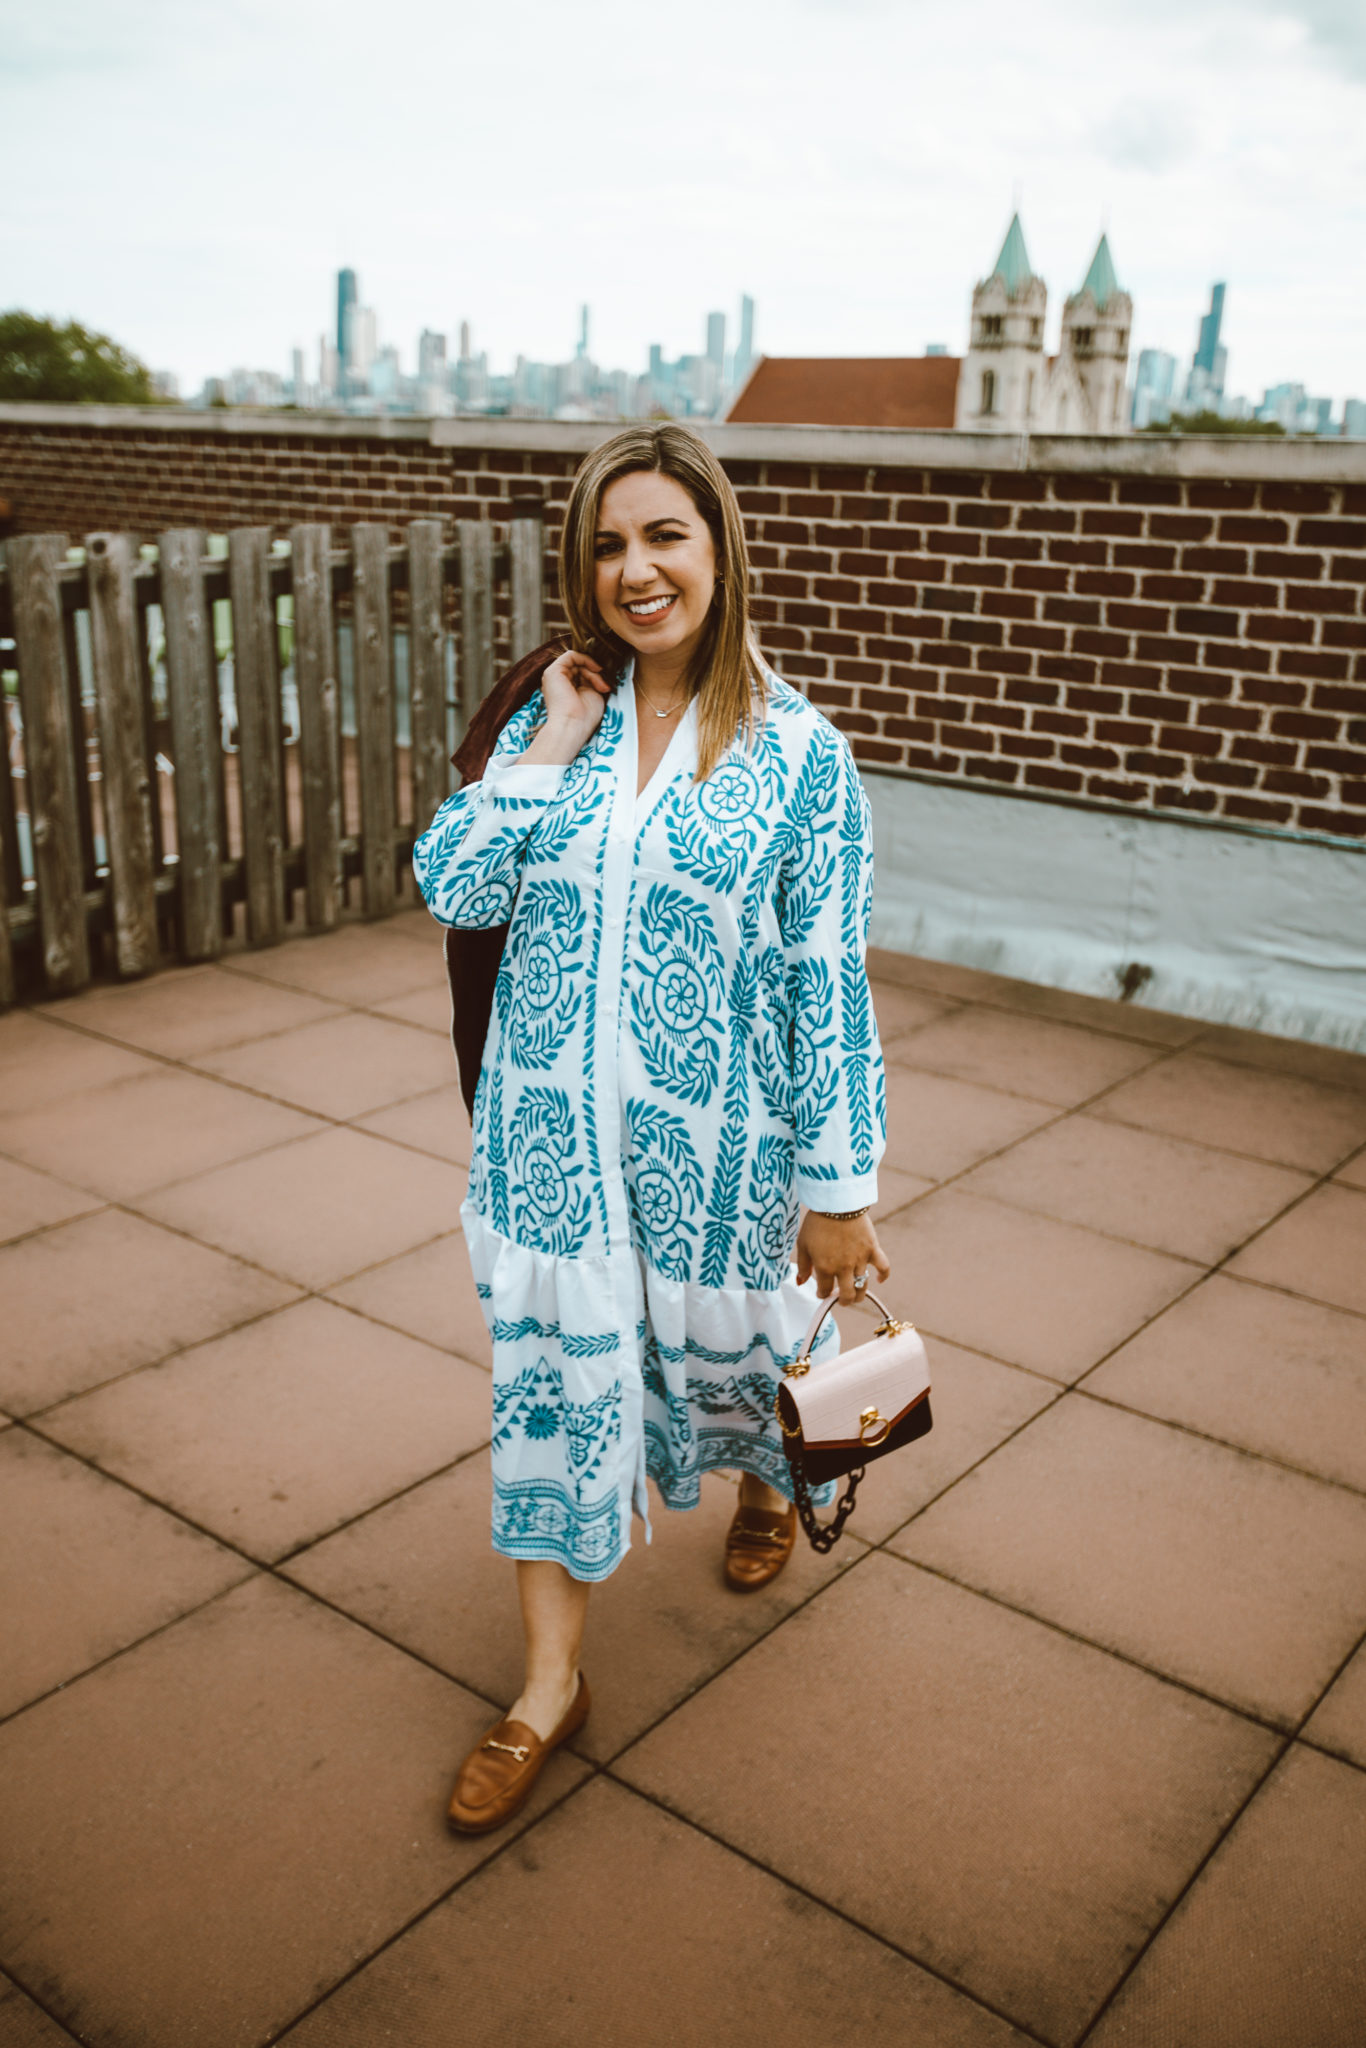 Giving Back With Kendra Scott Jewels by popular Chicago fashion blog, Glass of Glam: image of a woman outside wearing a SHEIN Tribal Print Shirt Dress, ShopBop Sam Edelman Loraine Loafers, Nordstrom BLANKNYC Suede Moto Jacket, Mulberry Small Harlow Satchel, Kendra Scott Deena Gold Earrings and Kendra Scott Ever Gold Pendant Necklace In Blush Dichroic Glass.